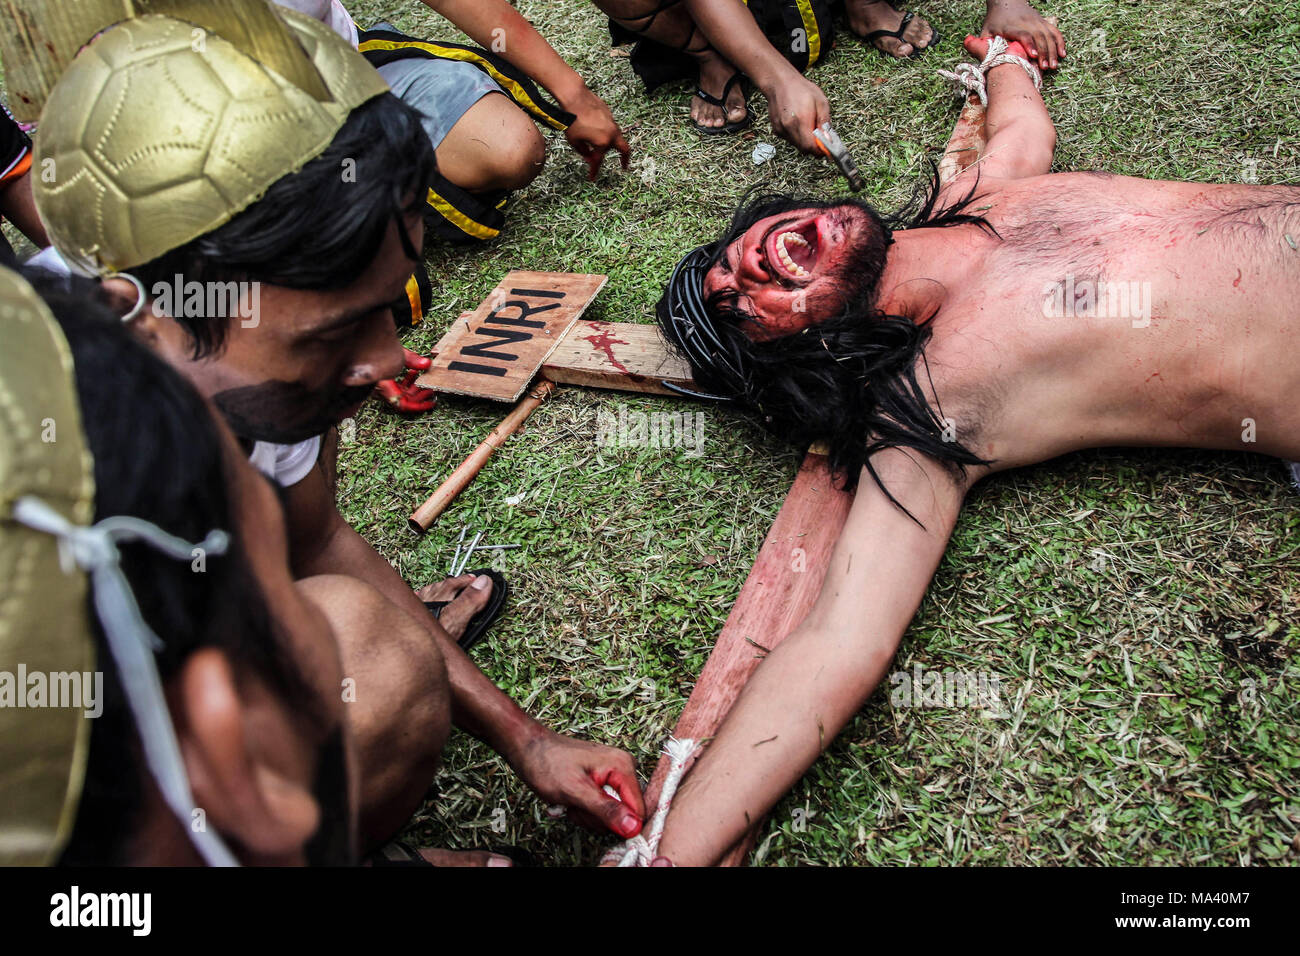 Medan, North Sumatra, Indonesia. 30th Mar, 2018. Indonesian Christians people as actor reenacts the crucifixion of Jesus Christ during a Good Friday procession in Medan, North Sumatra on March 30, 2018. As Christians mark Friday as the death, of the life after the third day, otherwise known holy week of Easter Sunday in celebration of the crucifixion and resurrection Jesus Christ, a as Muslim-dominated population country. Christians in Indonesia visited the grave of their families member who believe in living with Jesus Christ. Credit: Ivan Damanik/ZUMA Wire/Alamy Live News Stock Photo